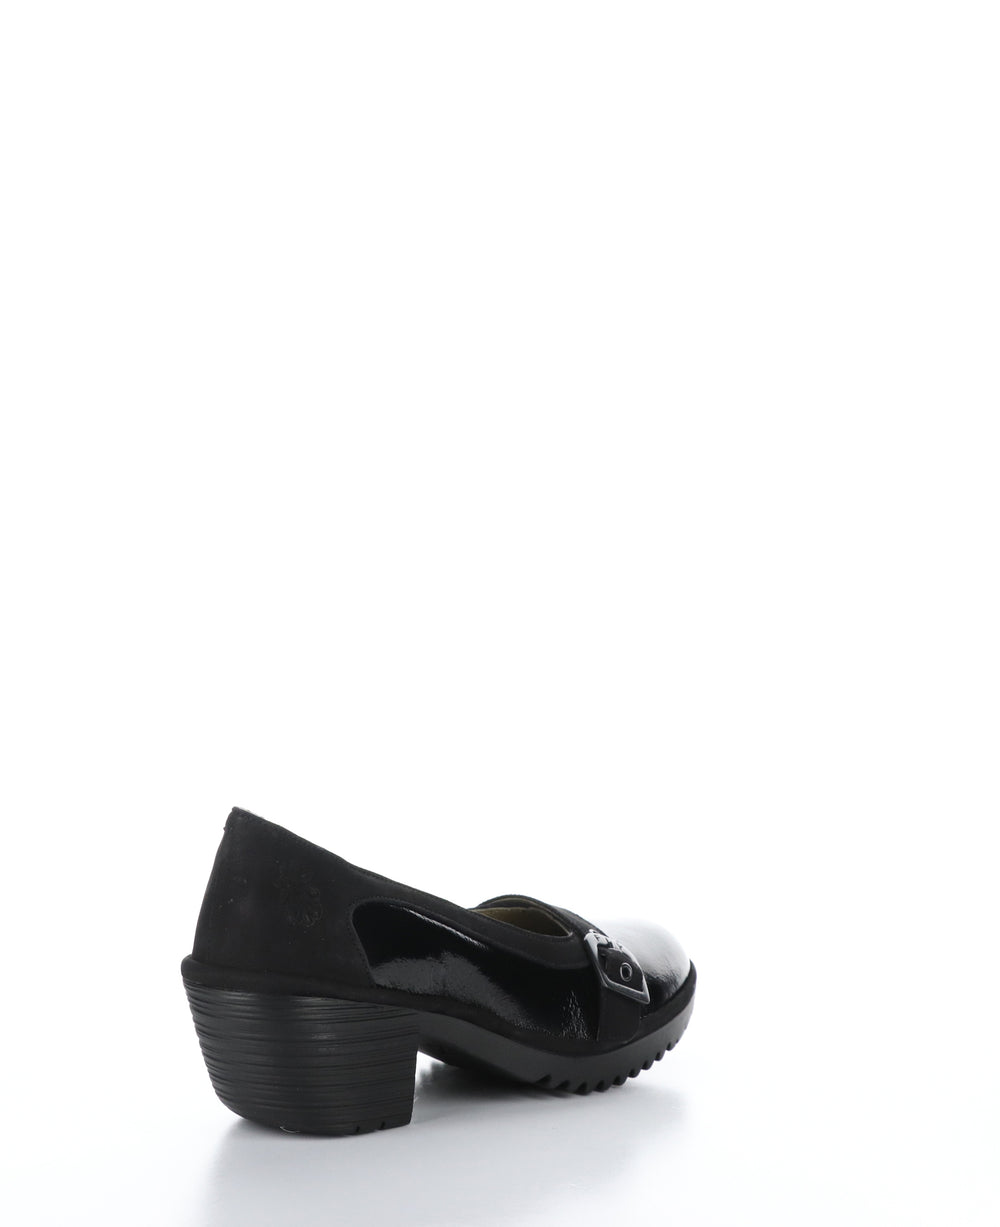 WASB343FLY Black Round Toe Shoes